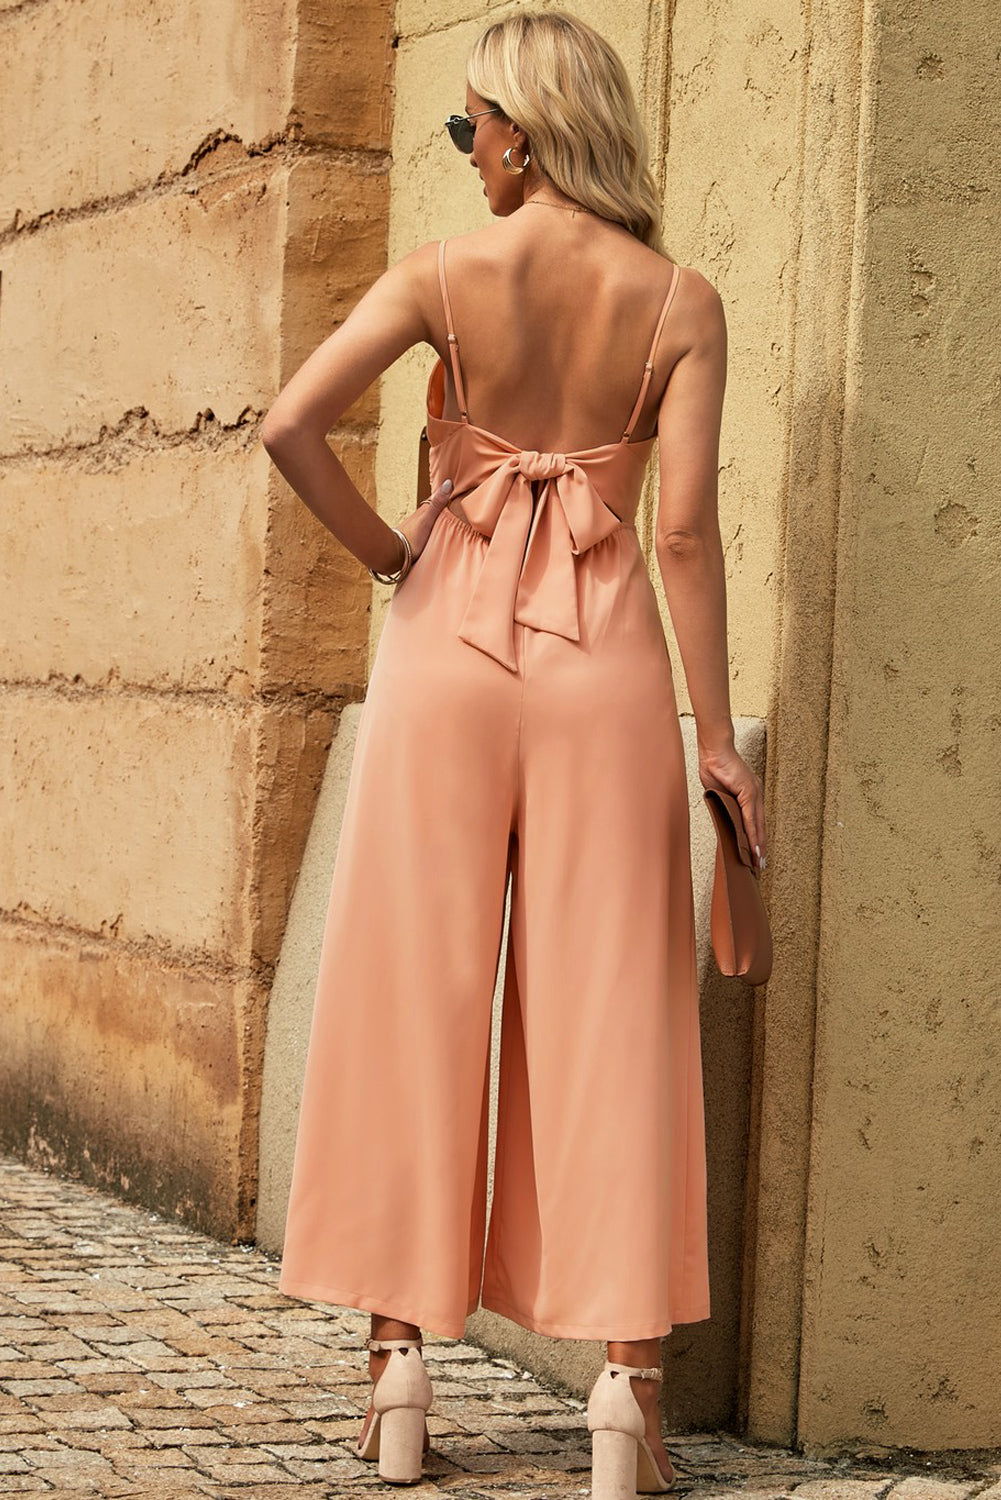 Spaghetti Strap Tied Seam Detail Jumpsuit - Online Only